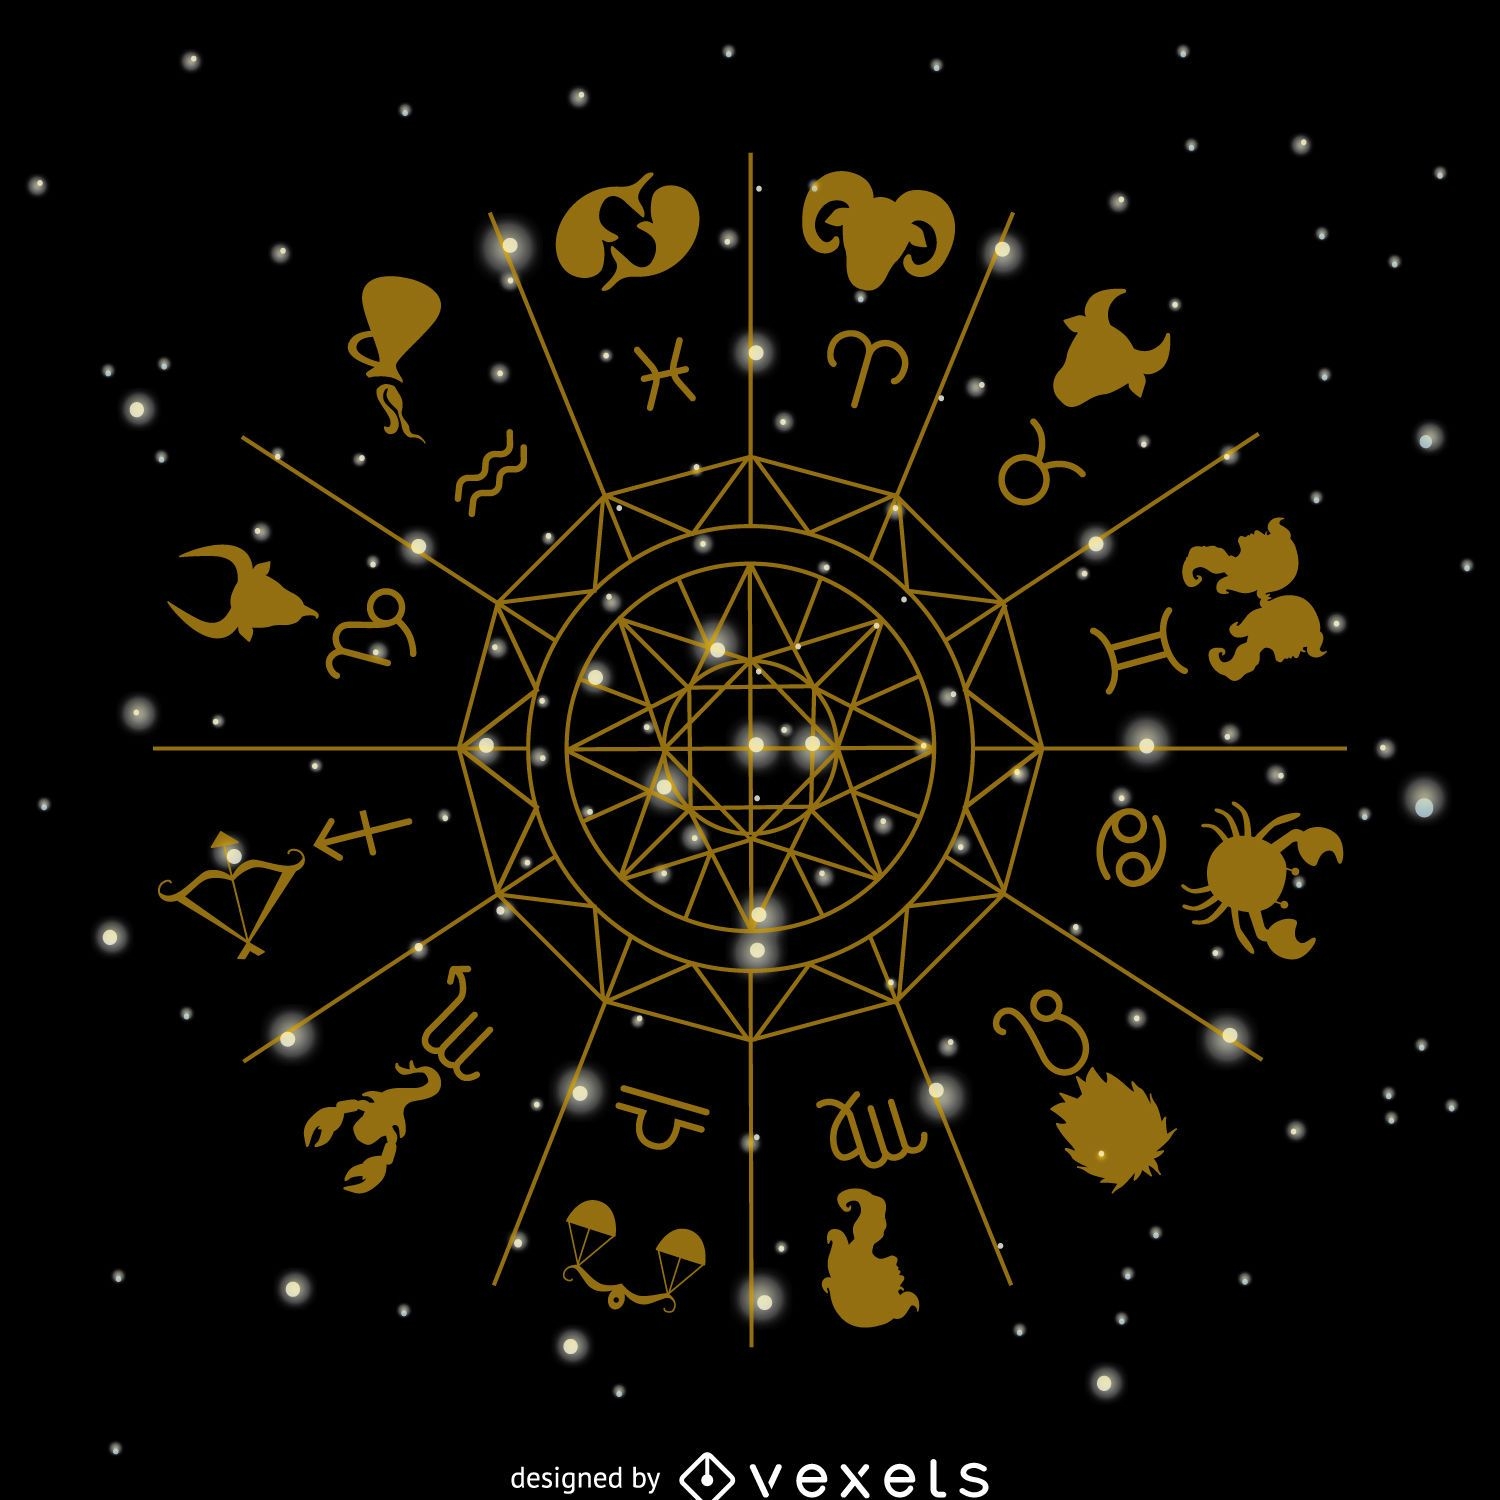 the circle representing the astrology signs